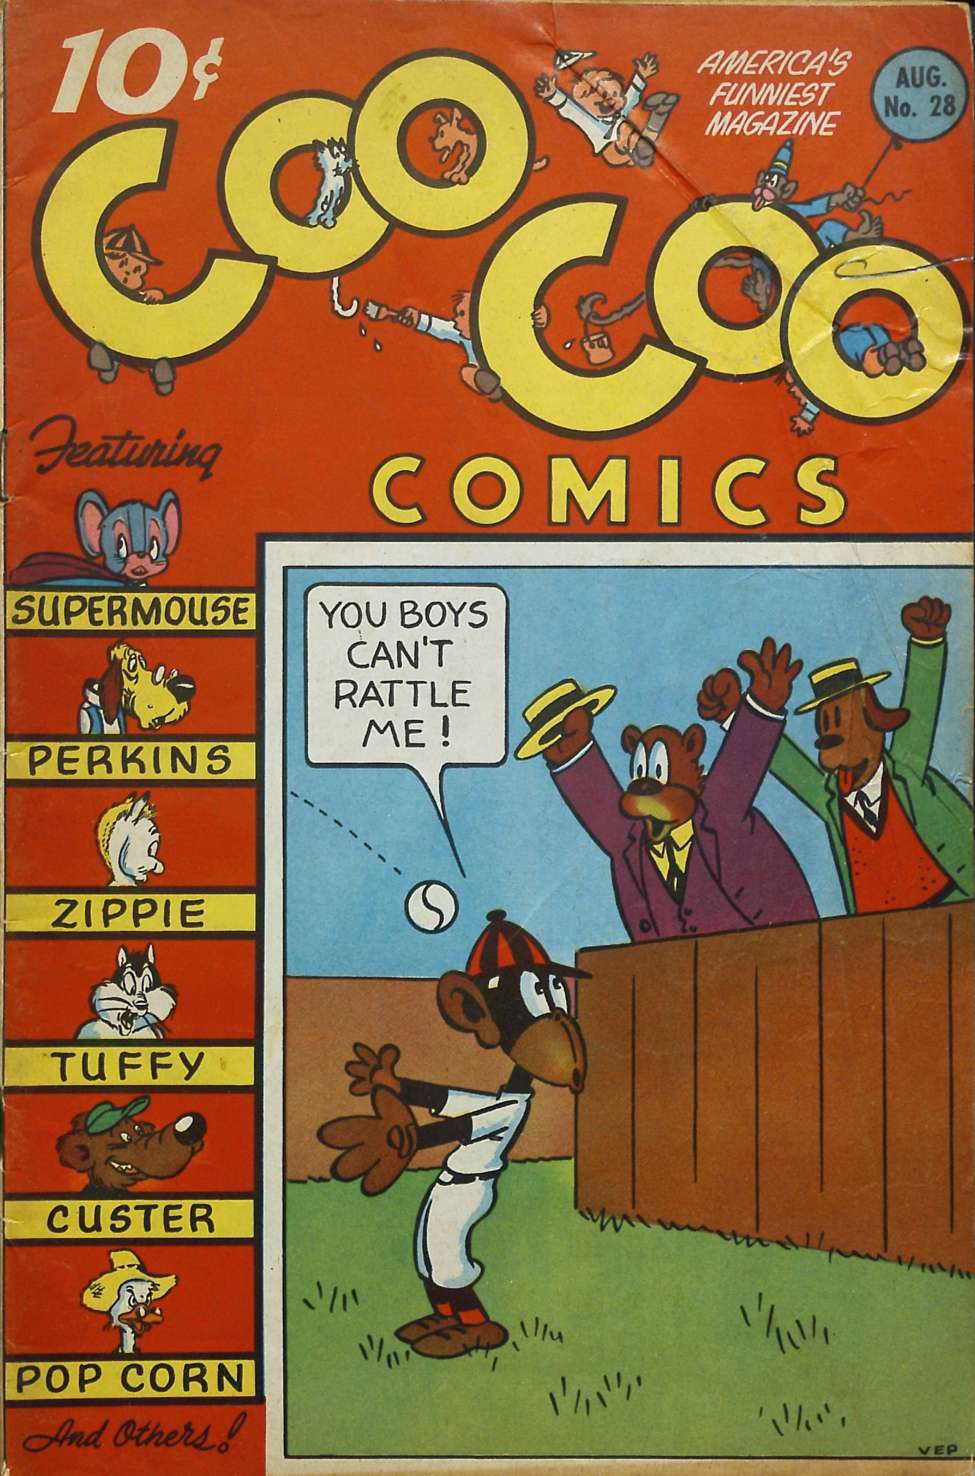 Book Cover For Coo Coo Comics 28 (alt)